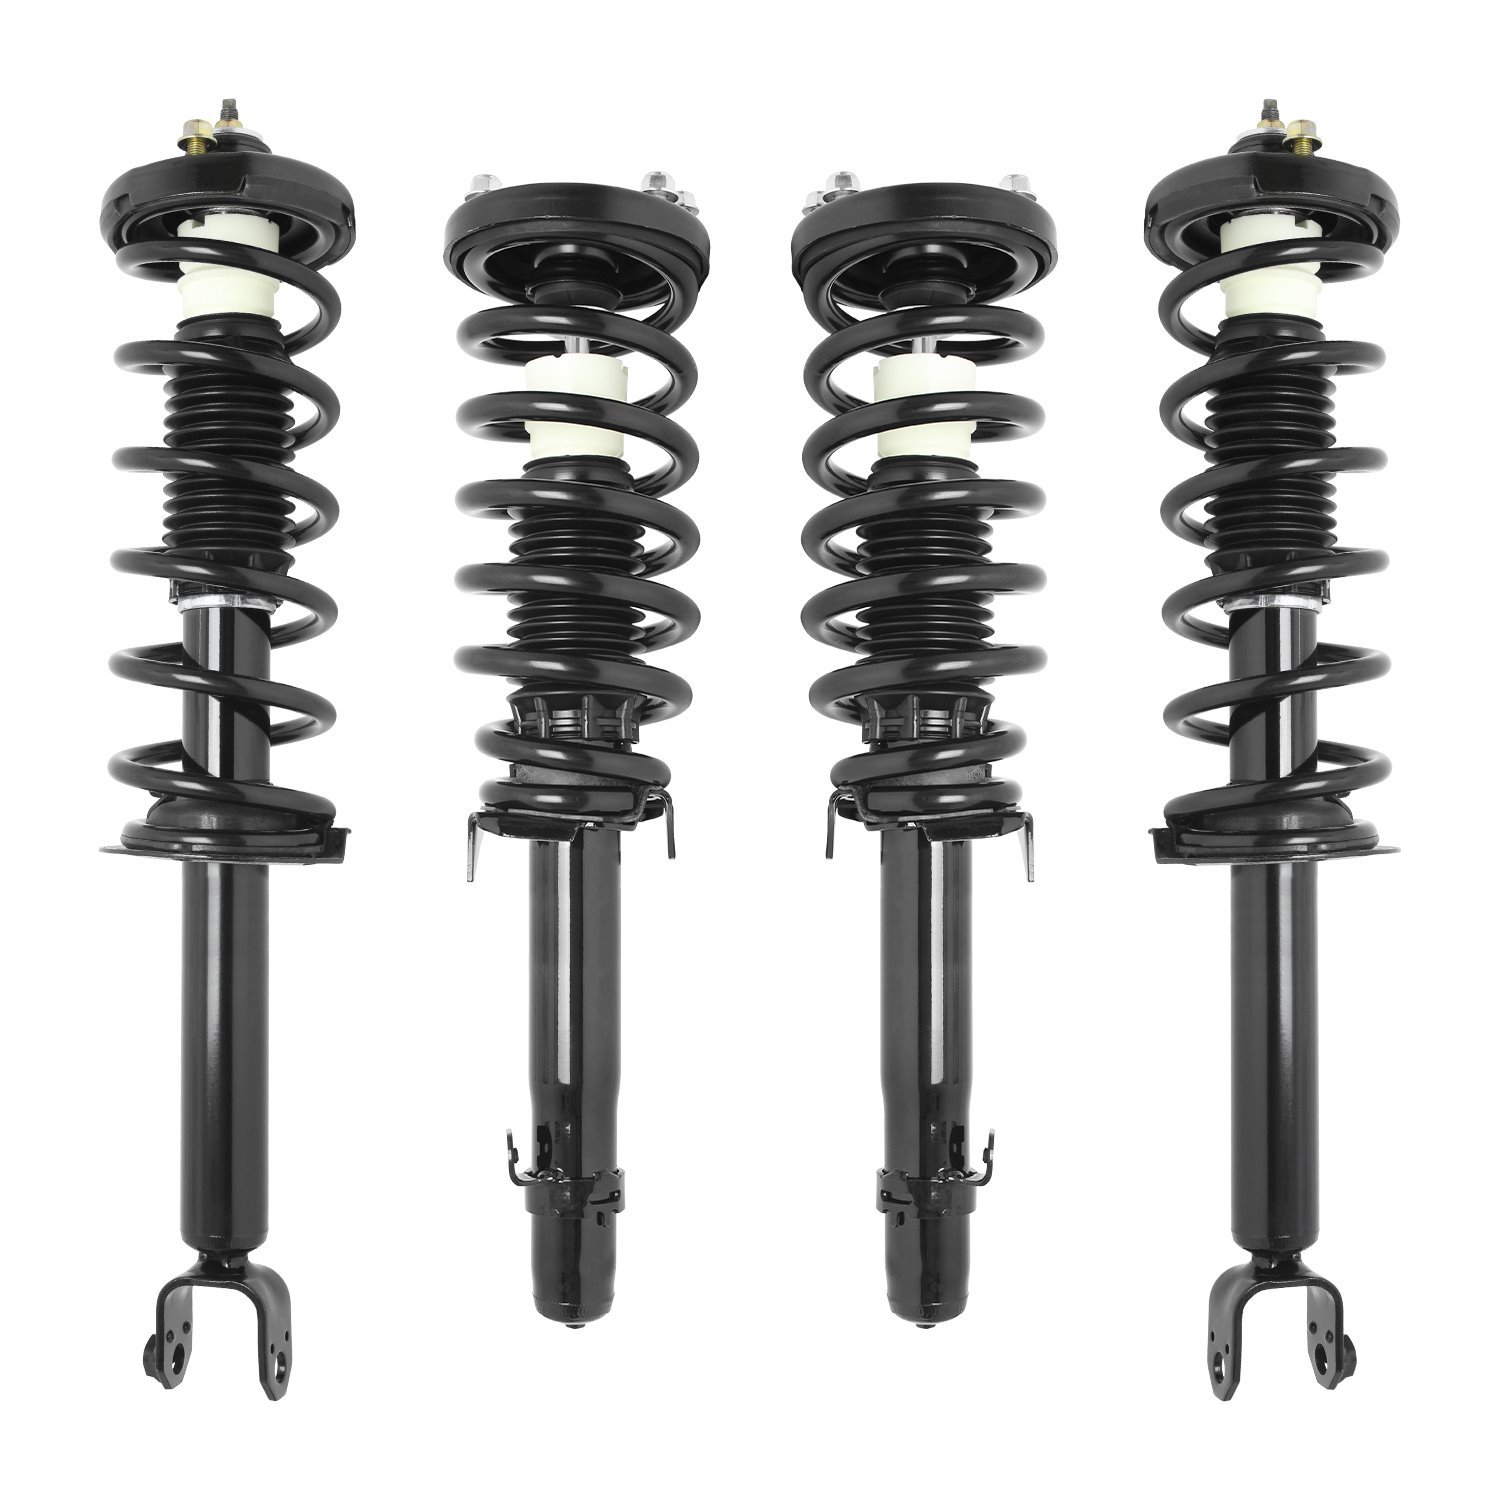 4-11825-15011-001 Front & Rear Suspension Strut & Coil Spring Assembly Kit Fits Select Acura TL